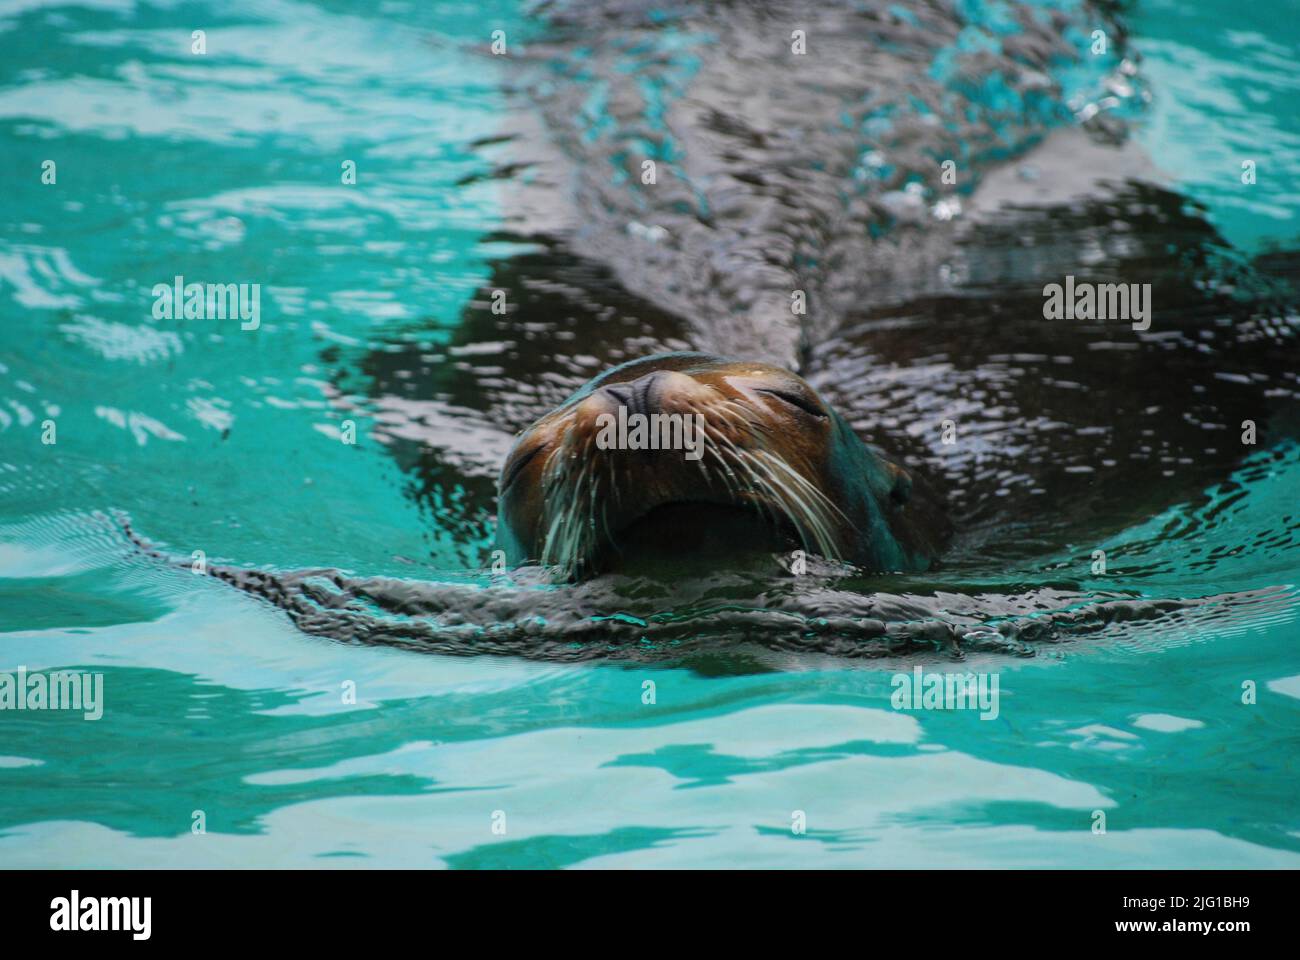 Sea lion emerging from water at the Bronx Zoo Stock Photo